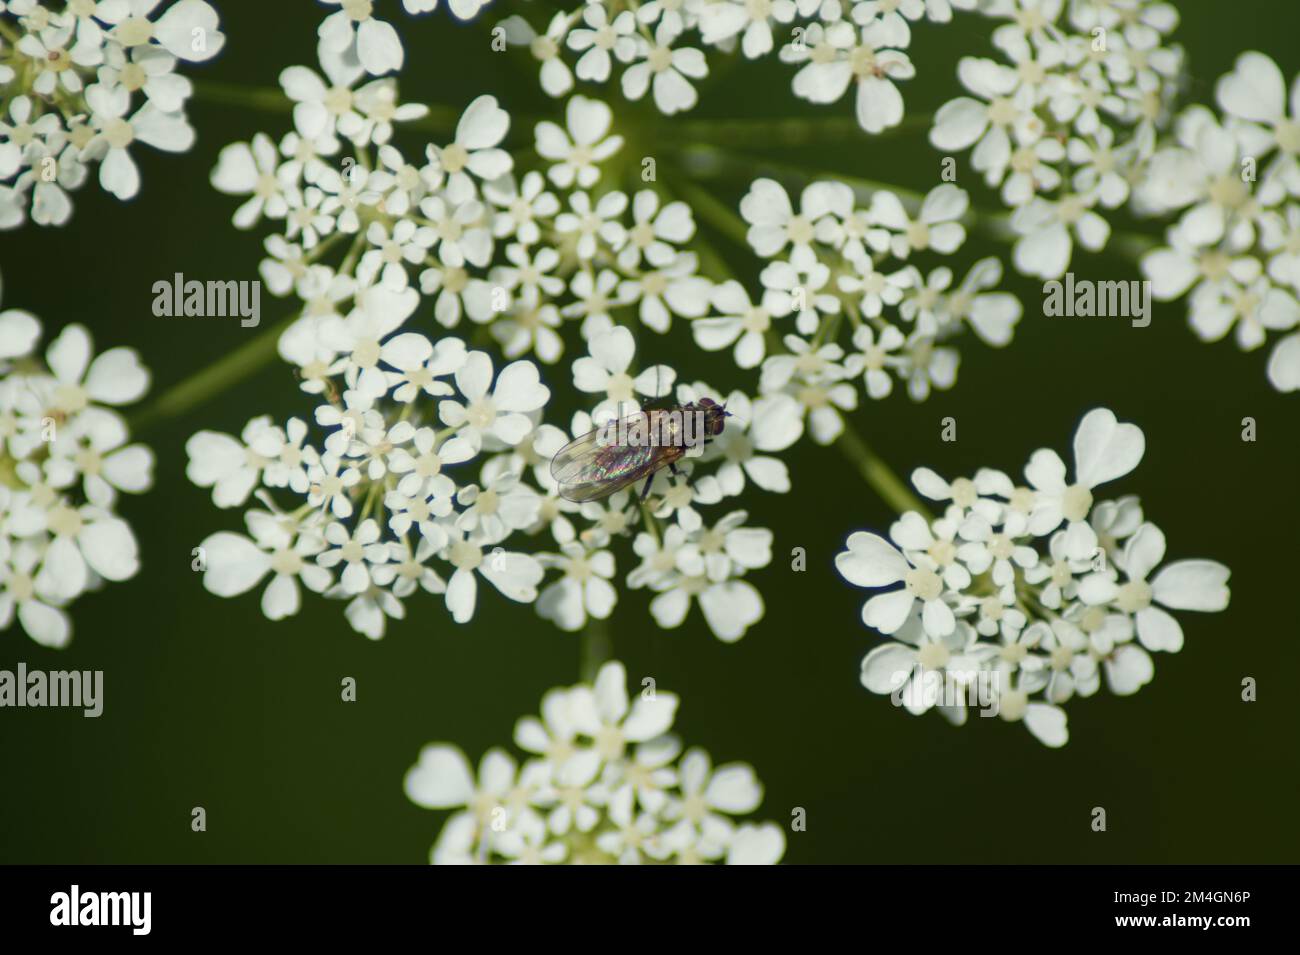 Fly sits on privet flower Stock Photo